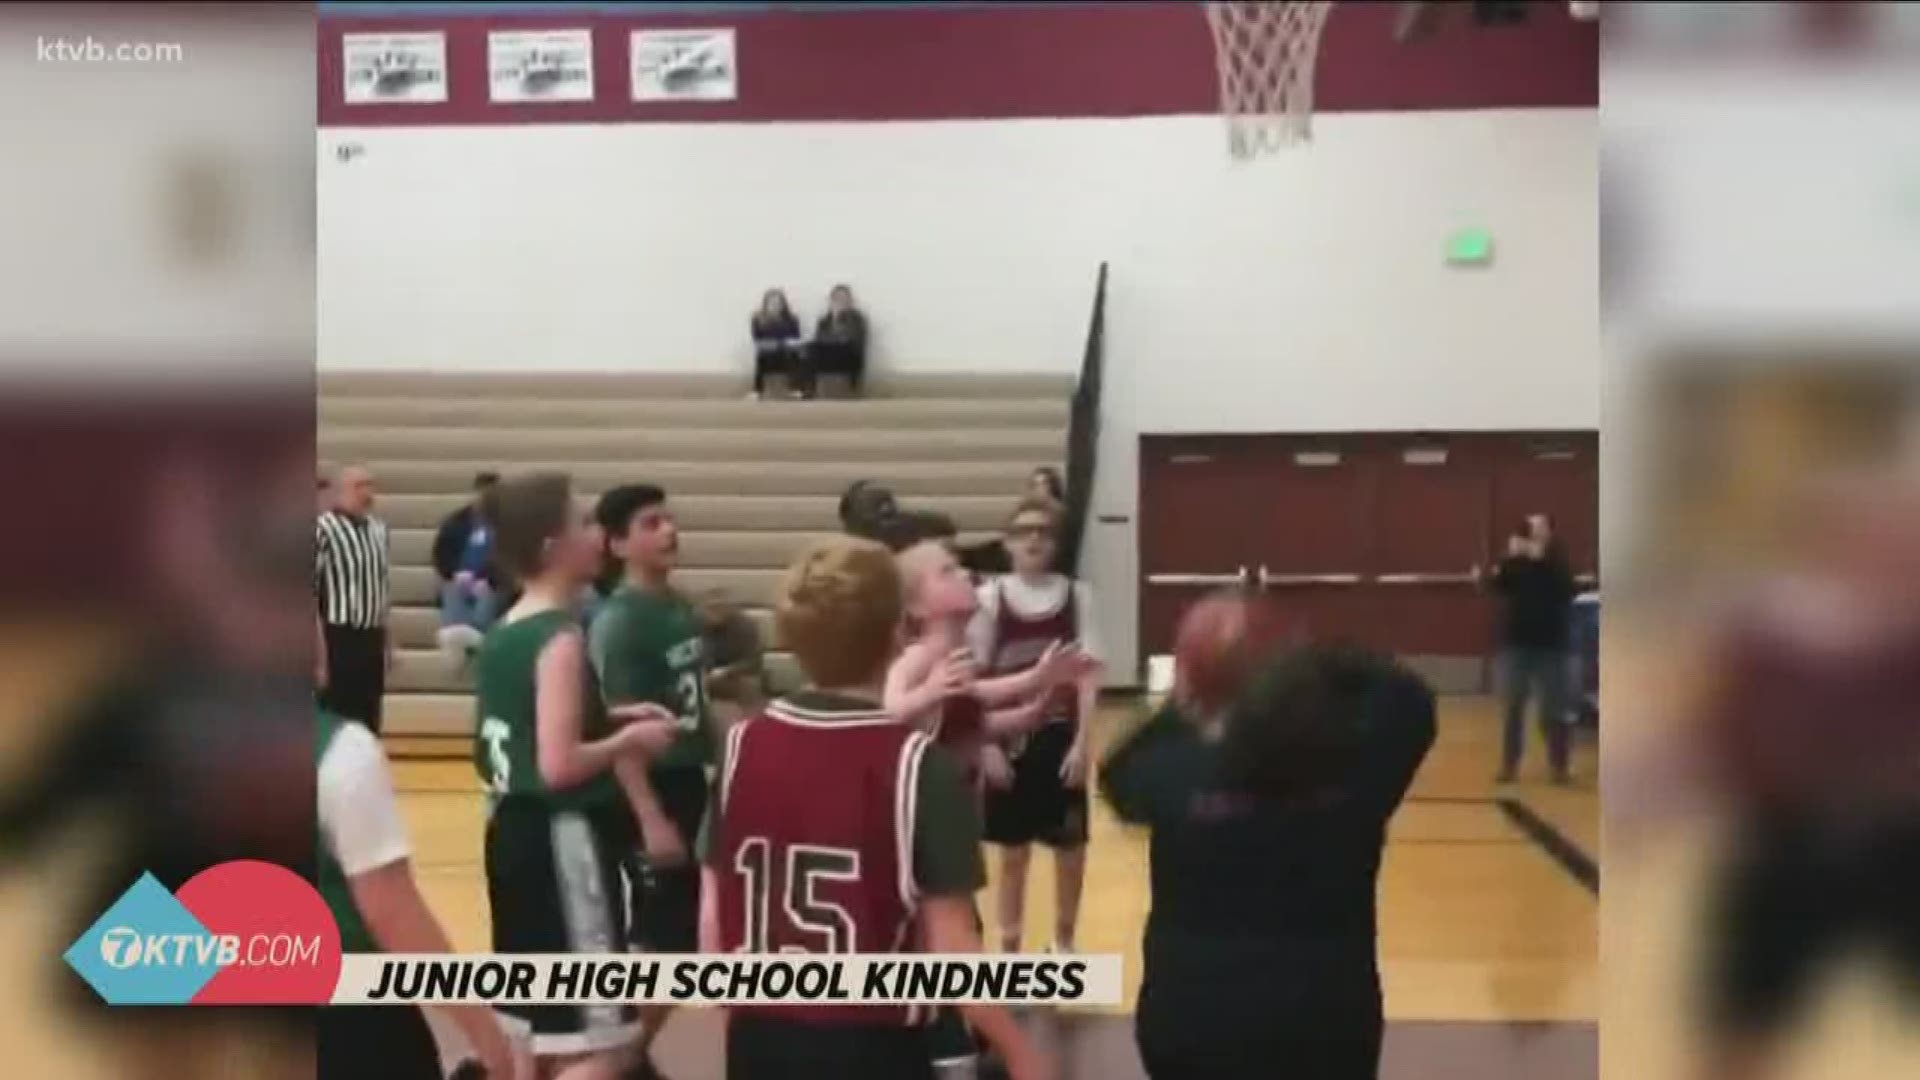 During the 7th grade boys basketball game at Riverglen Junior High, Bradley checked in and within a few seconds scored a basket.